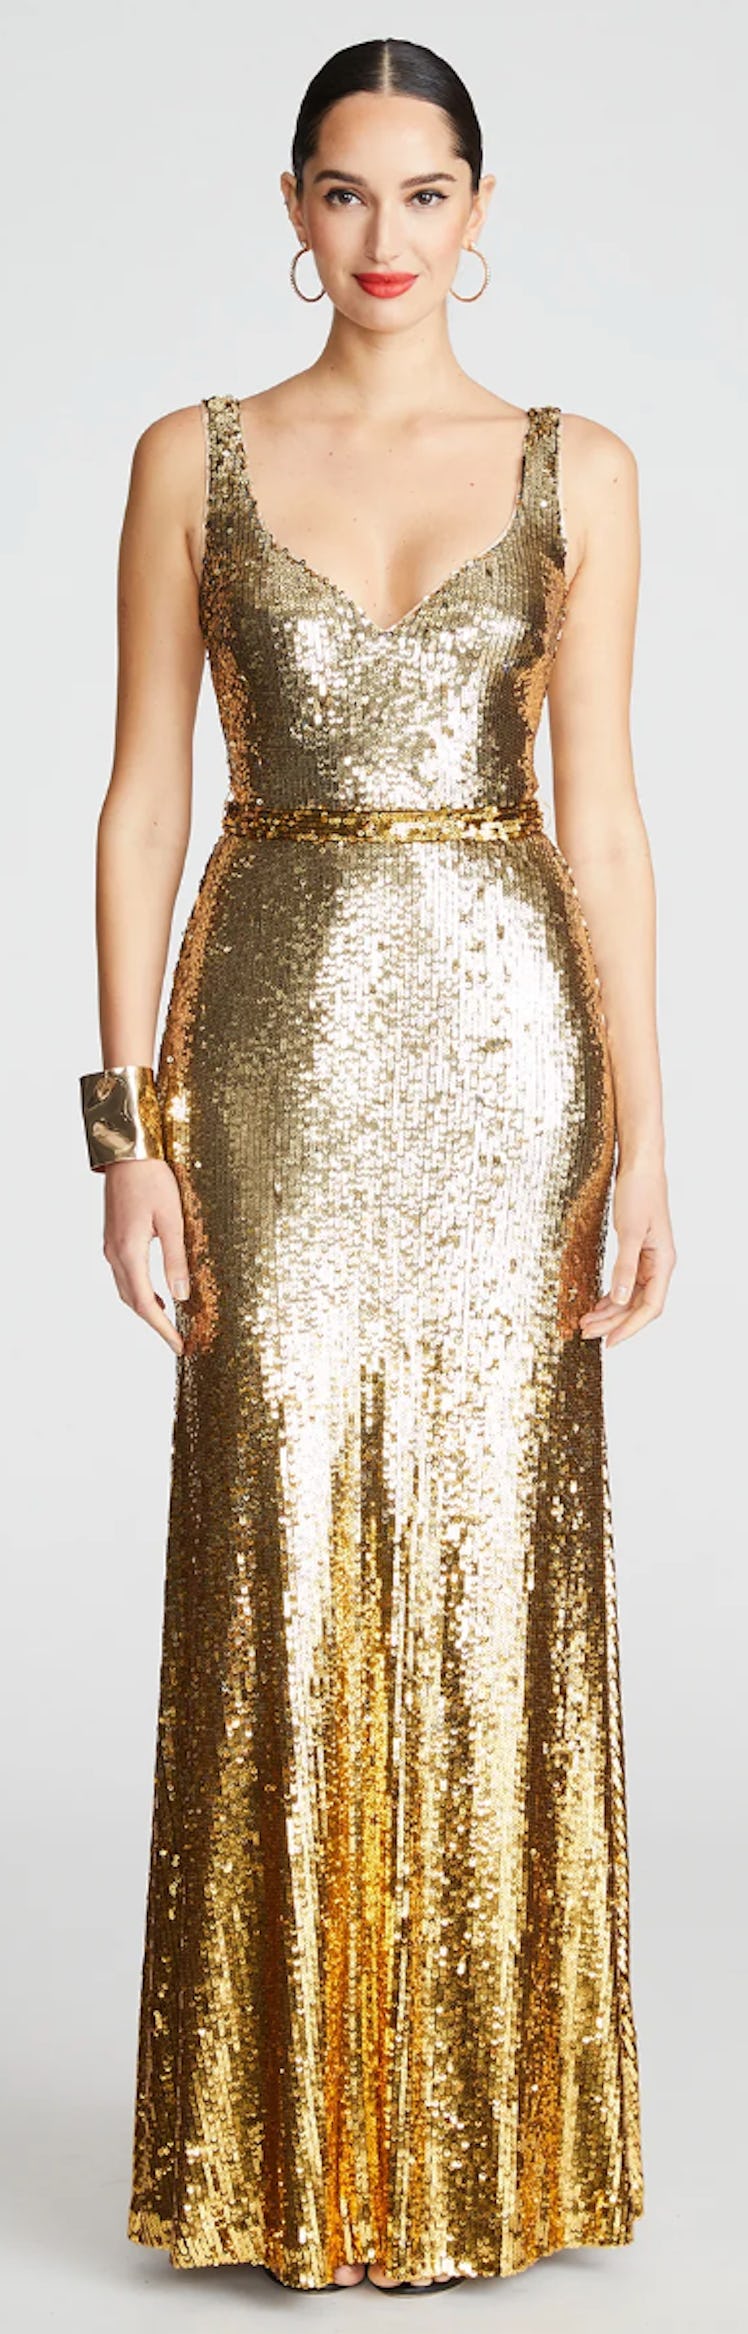 gold sequin gown